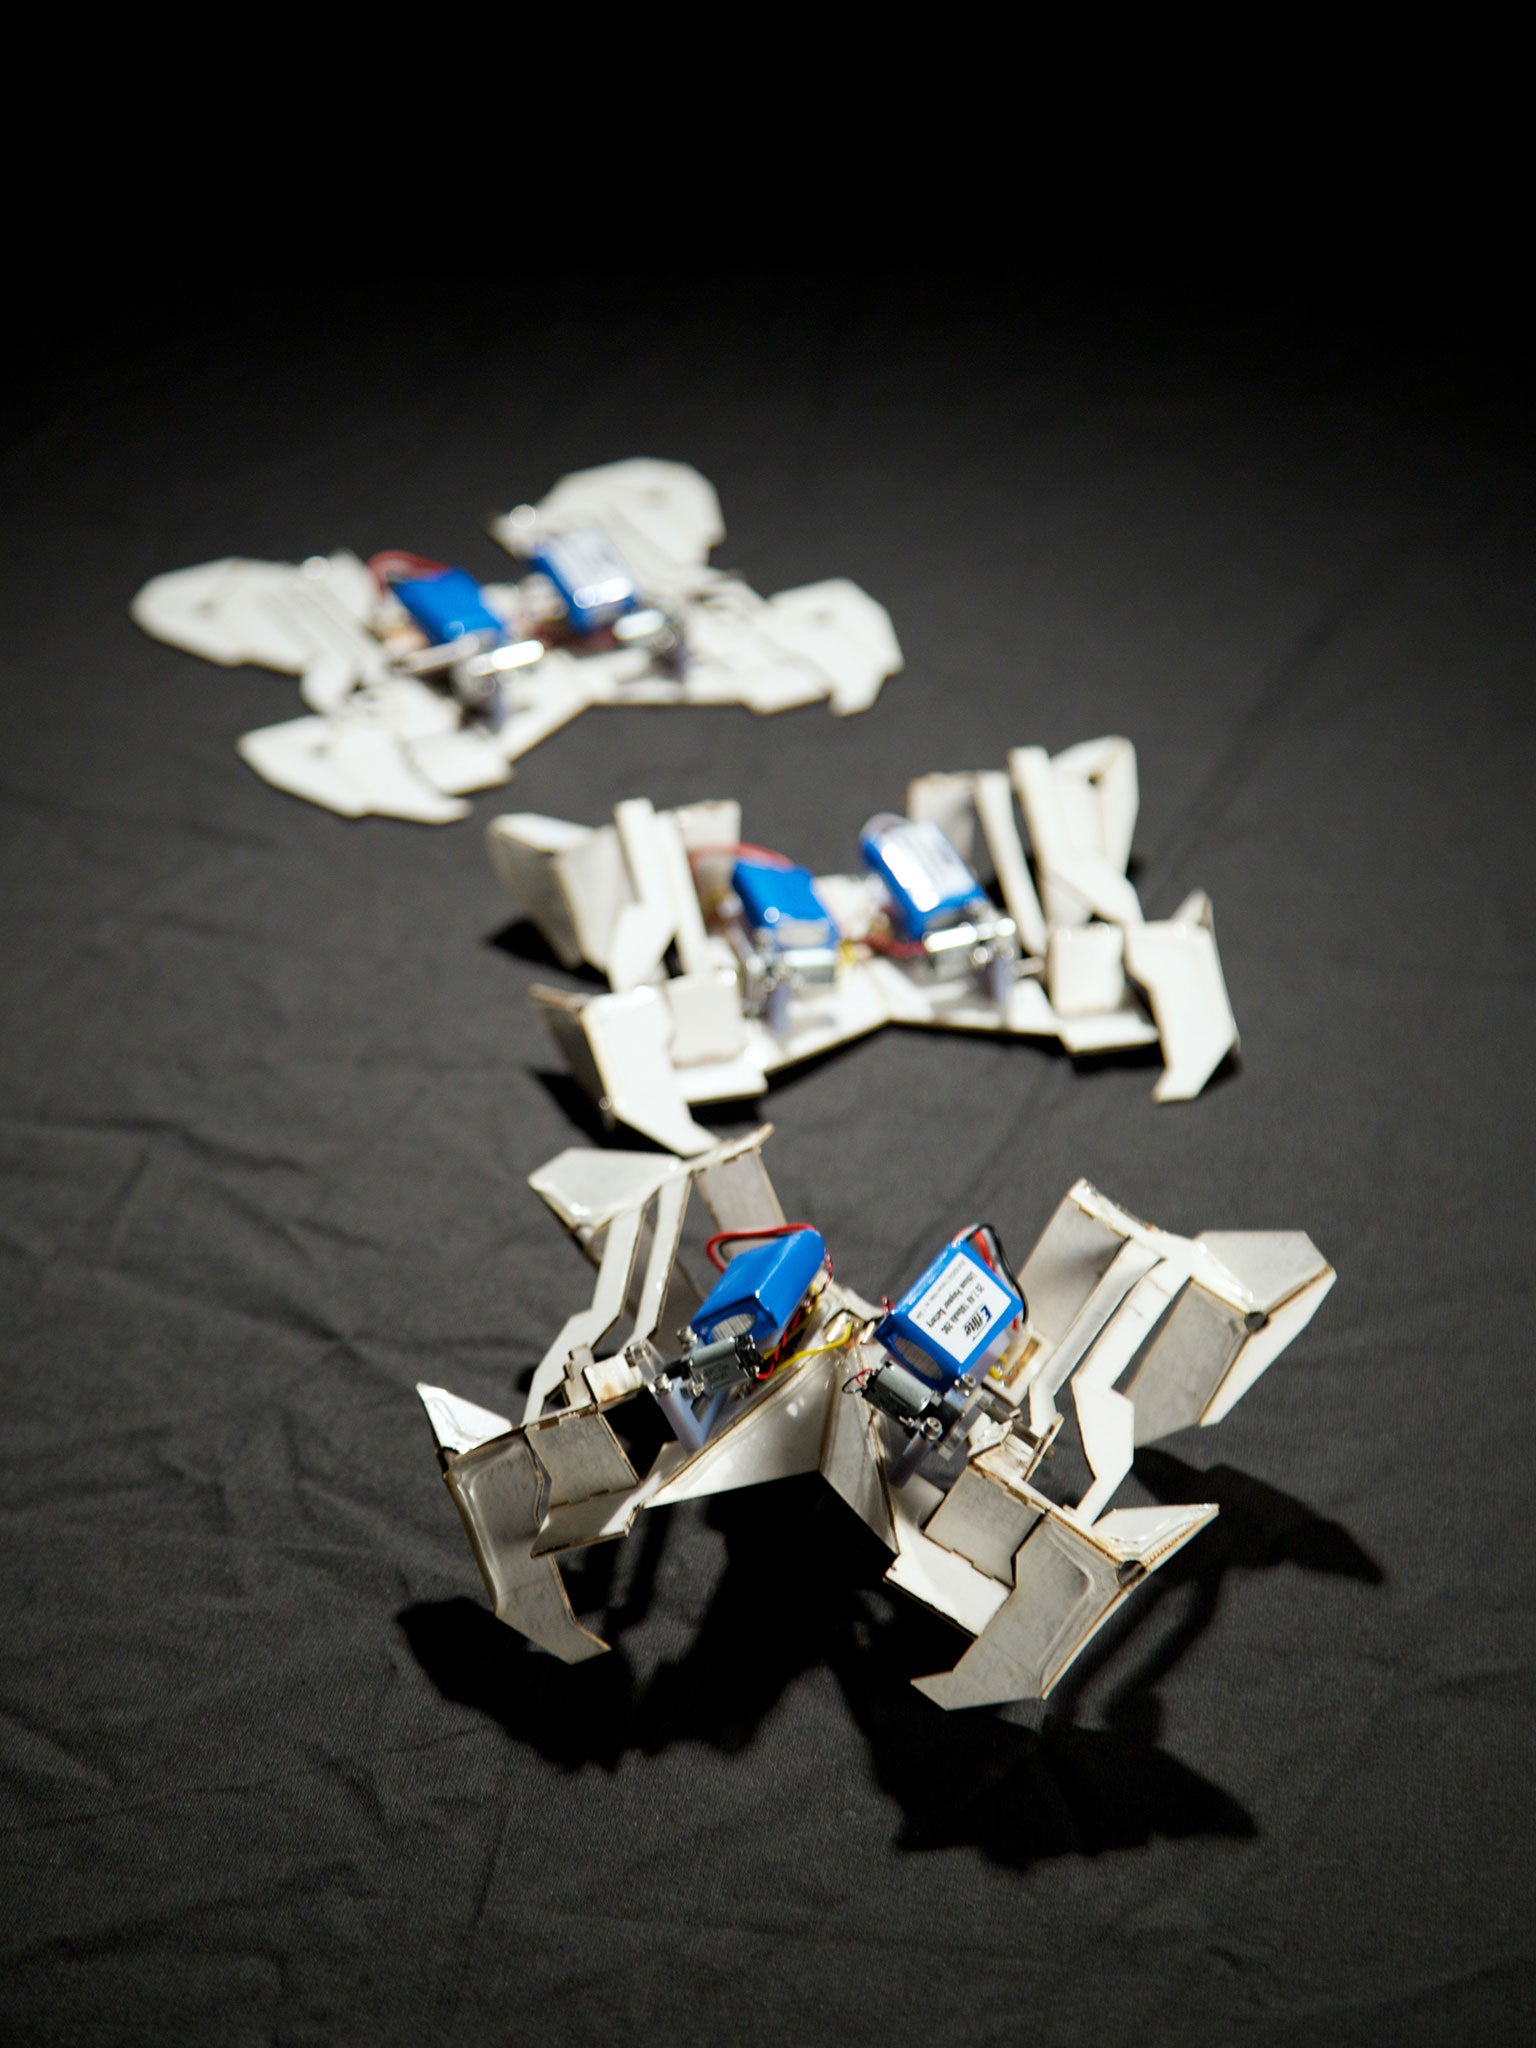 Scientists based many of their ideas for the self-folding, crawling robot on the Japanese art form origami